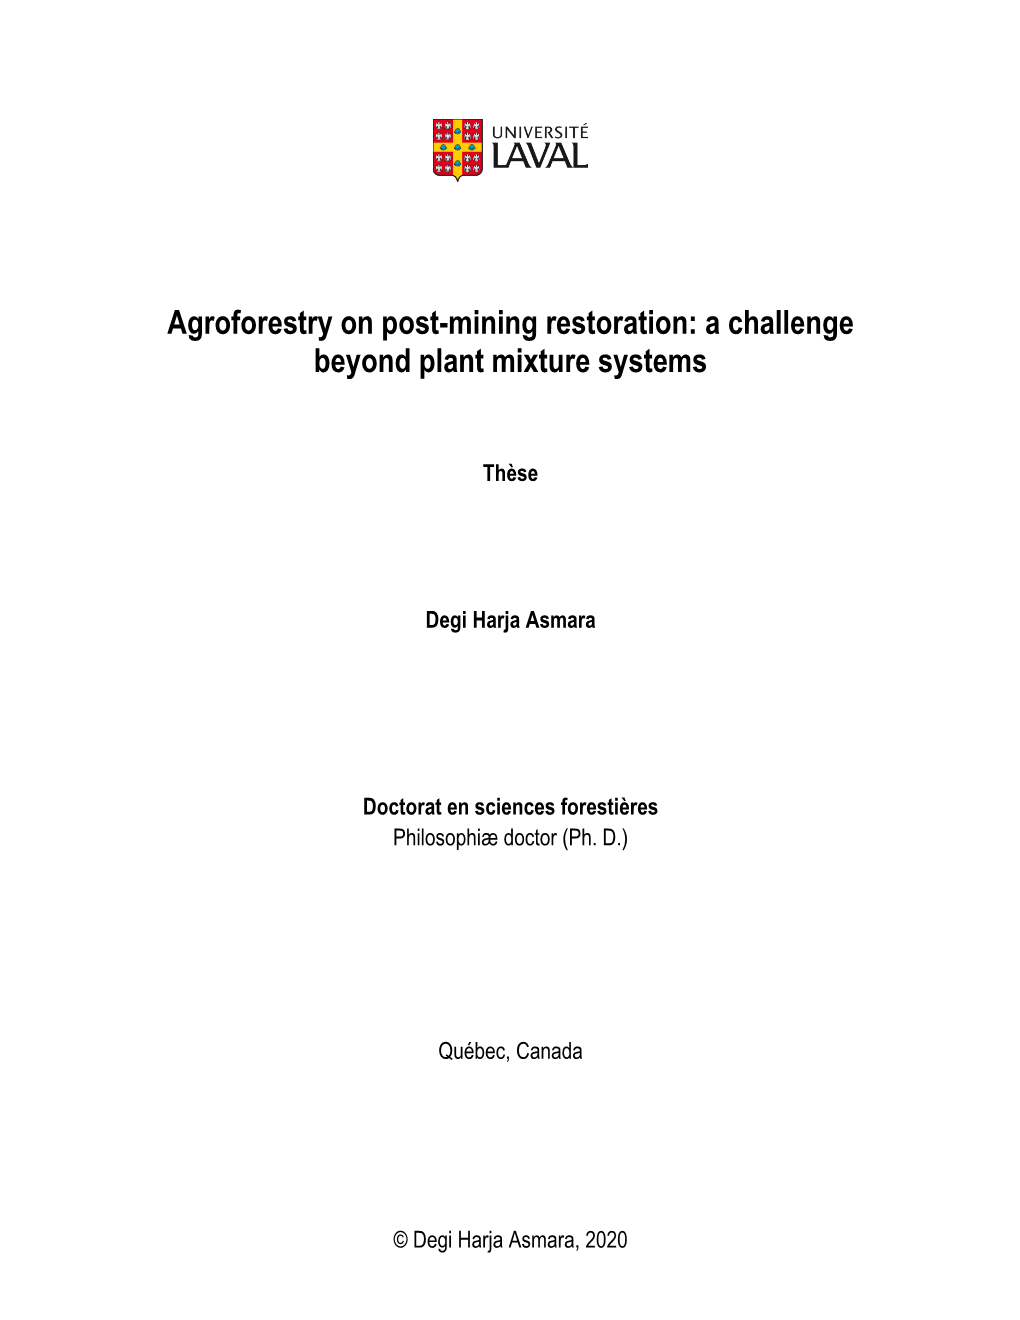 Agroforestry on Post-Mining Restoration: a Challenge Beyond Plant Mixture Systems